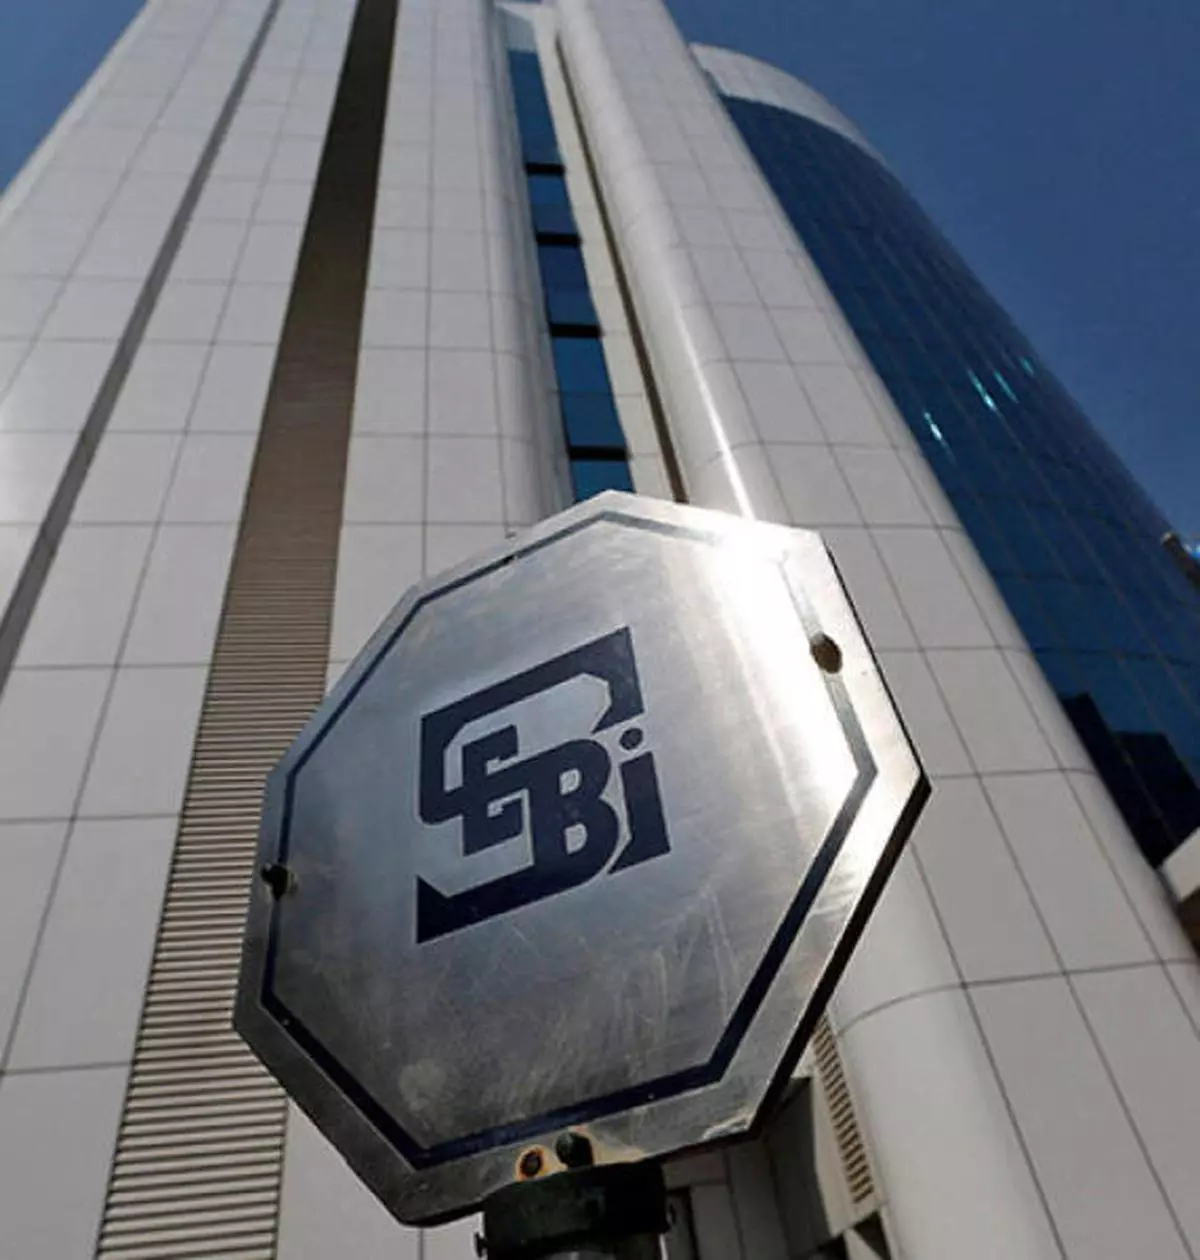 SEBI said 28 listed companies have ended in liquidation pursuant to CIRP